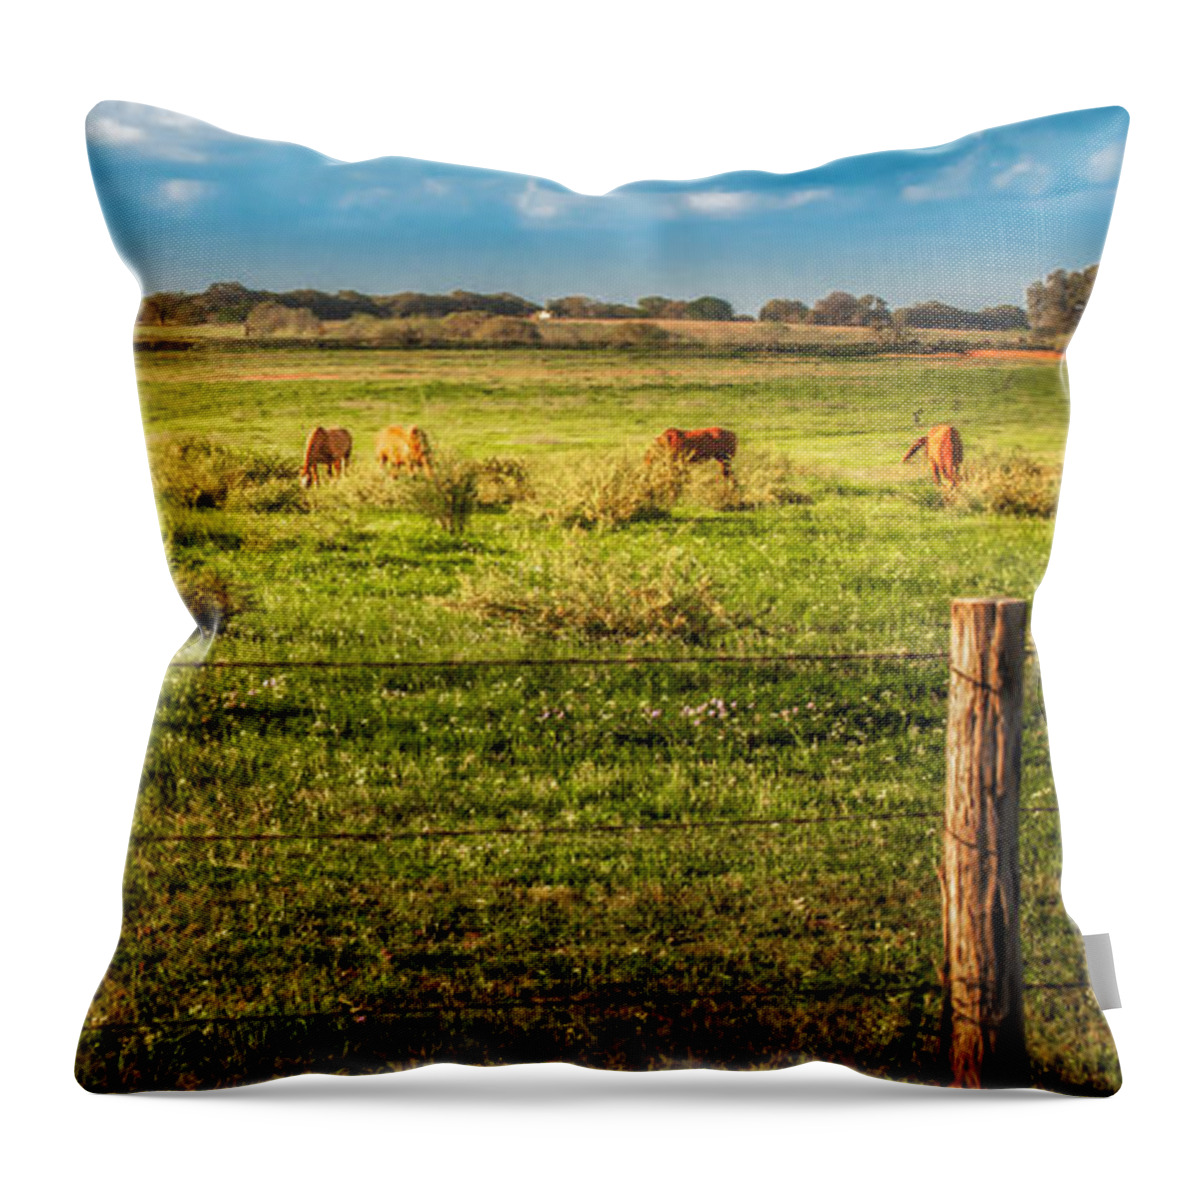 America Throw Pillow featuring the photograph Out For Dinner by Melinda Ledsome